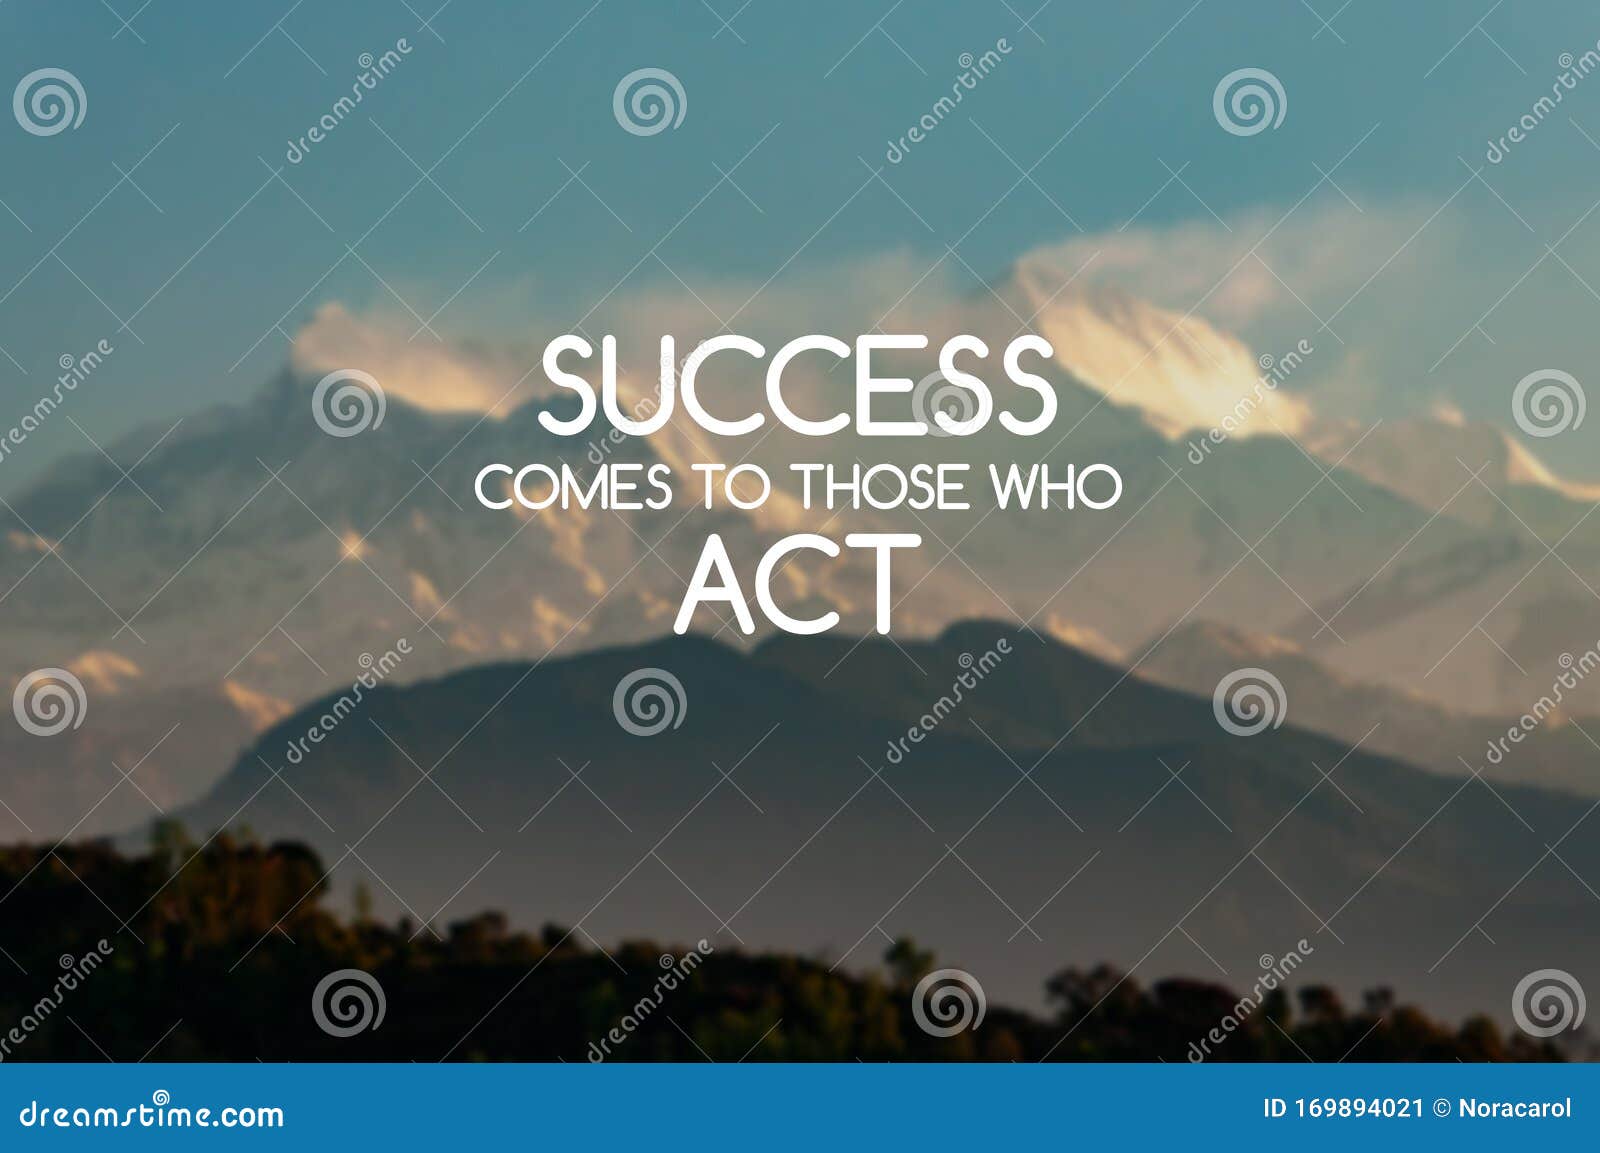 Motivational Quotes - Success Comes To those Who Act. Blurry ...